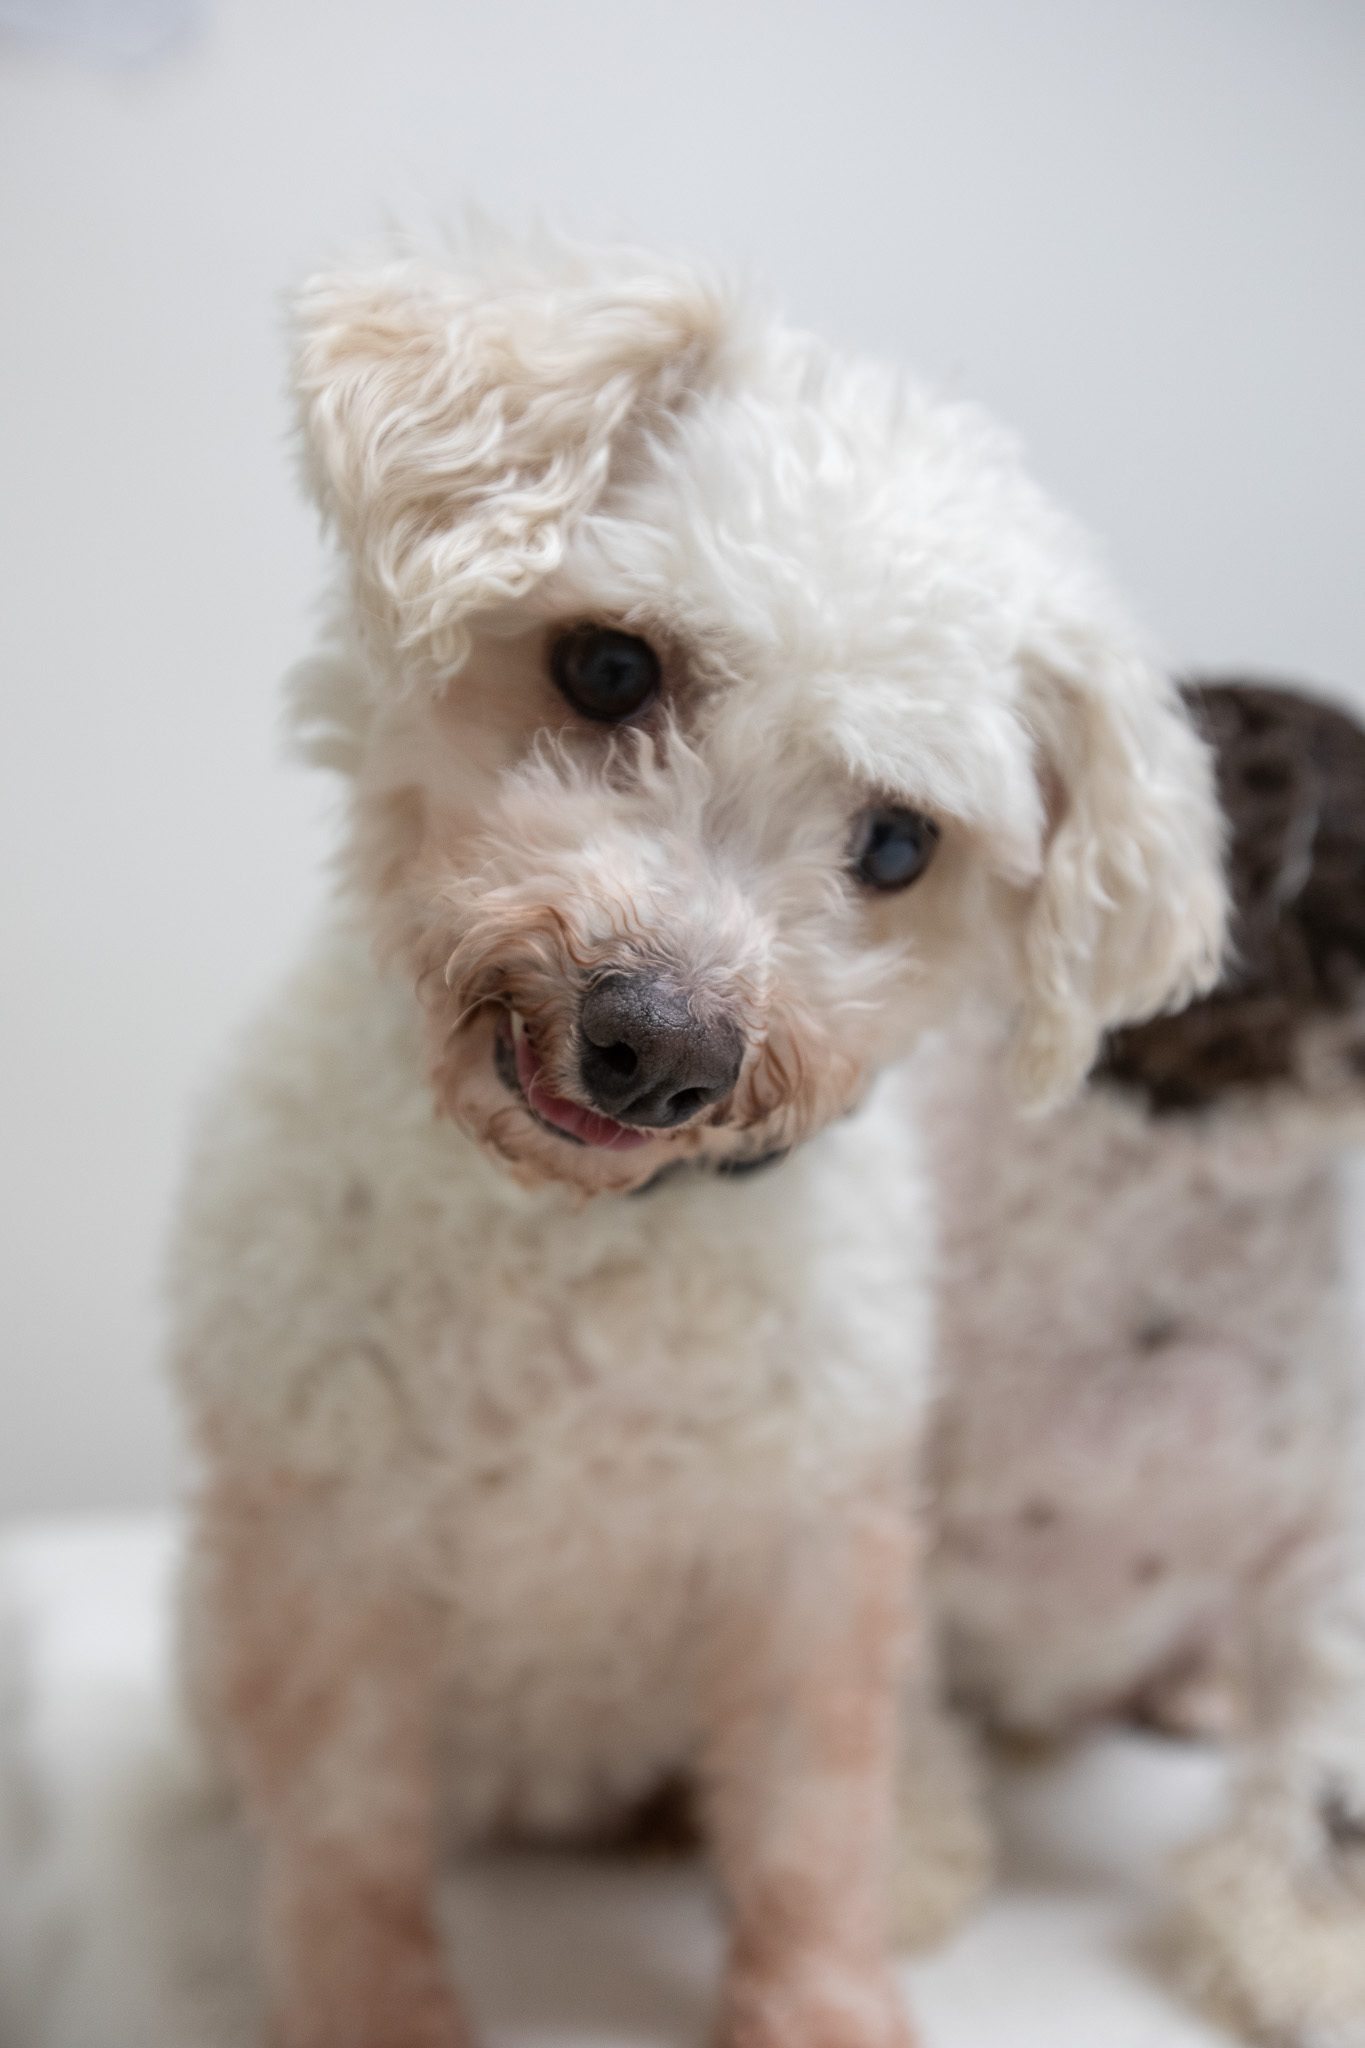 Dog for adoption - Molly, a Bichon Frise & Poodle Mix in NJ